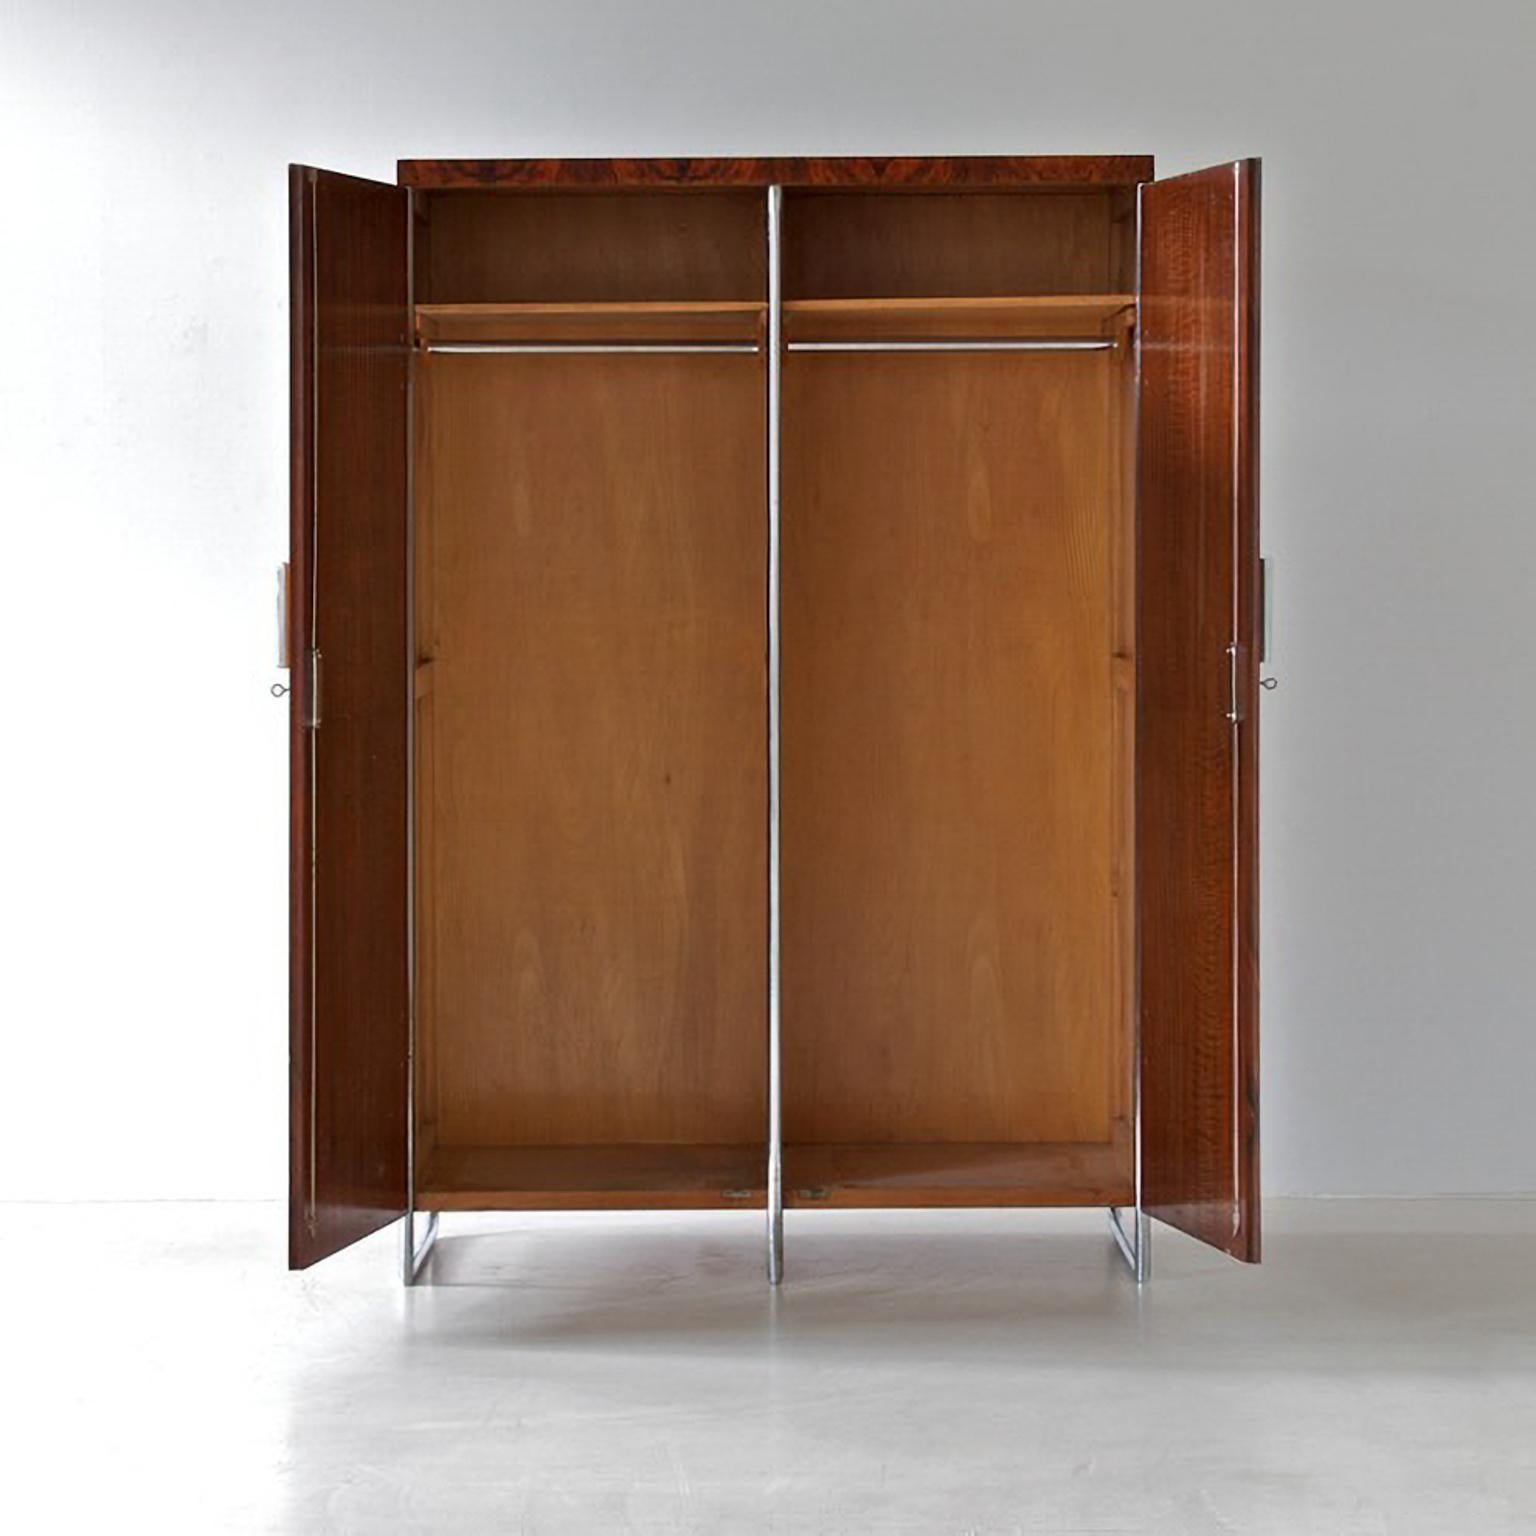 Mid-20th Century Modernist Two Door Wardrobe, Chrome Plated Metal and Walnut Veneer, circa 1930 For Sale